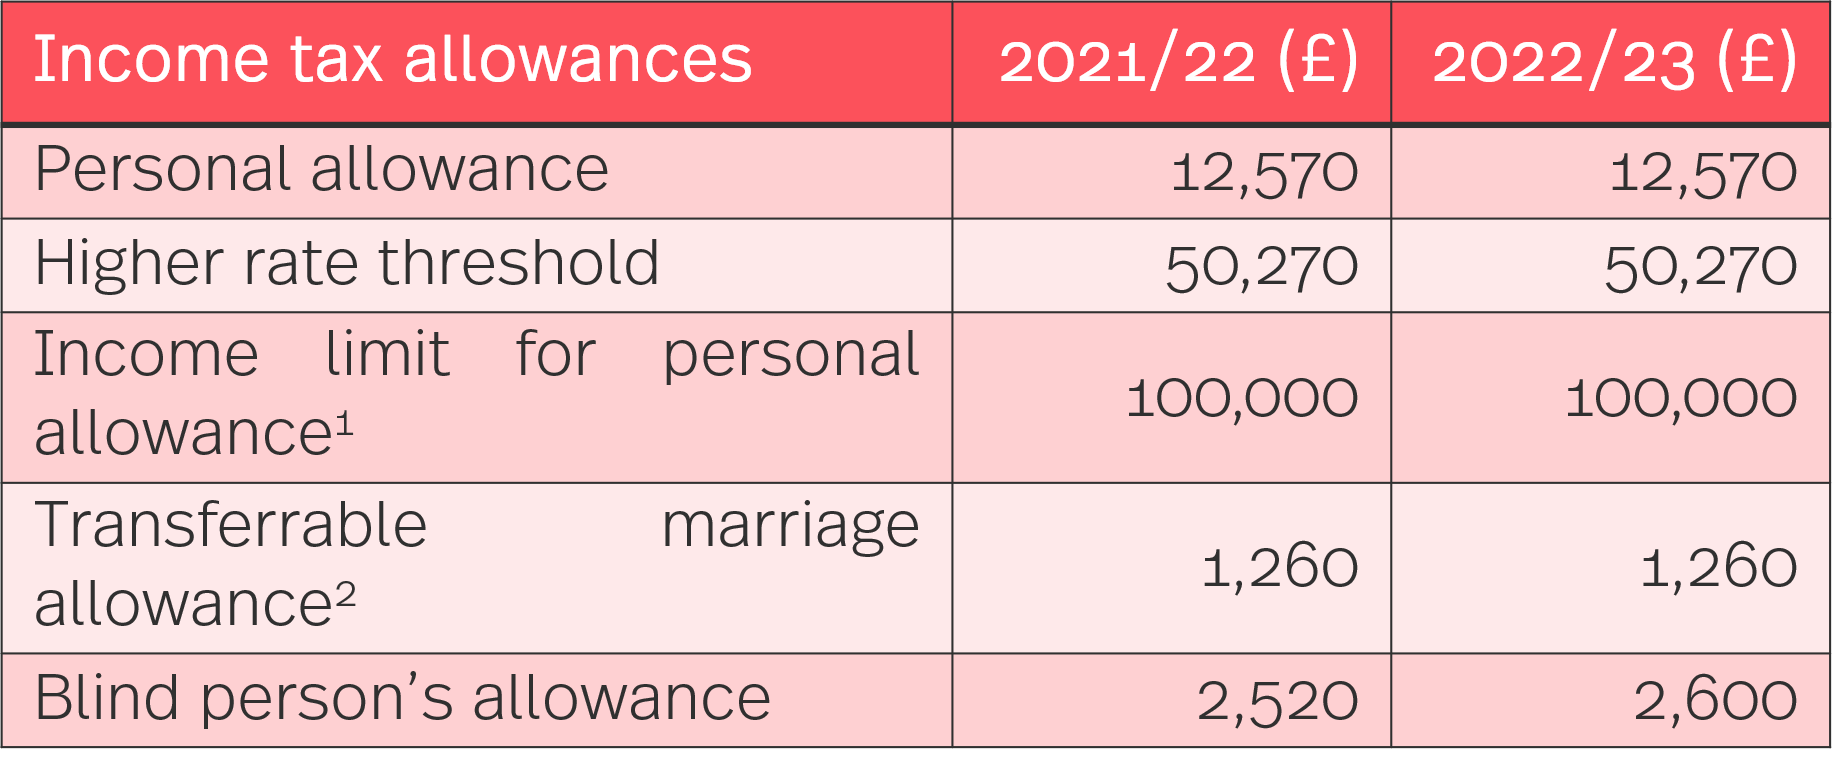 HMRC Tax Rates And Allowances For 2022 23 Simmons Simmons